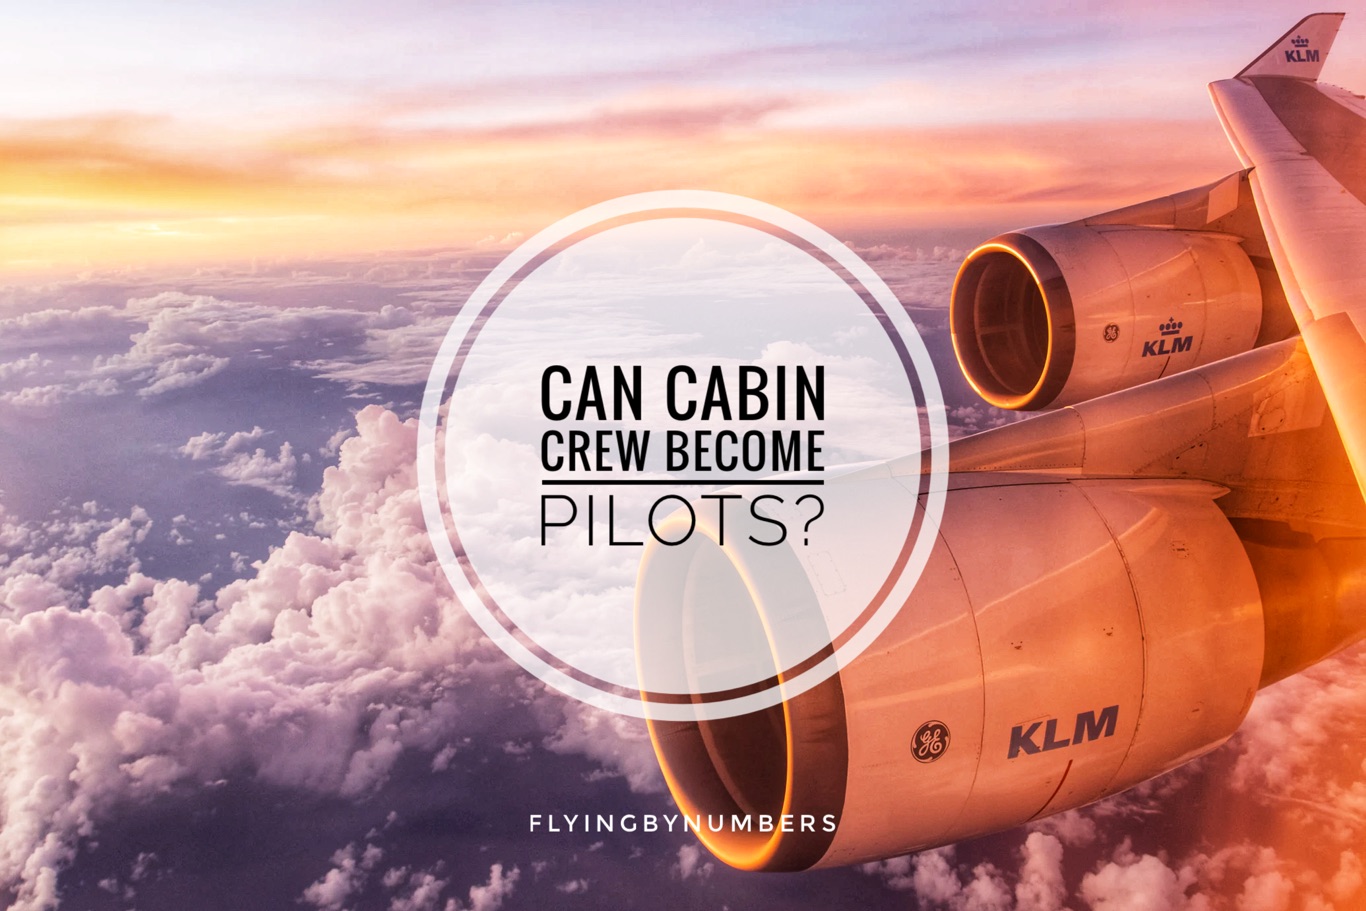 How do cabin crew become pilots?